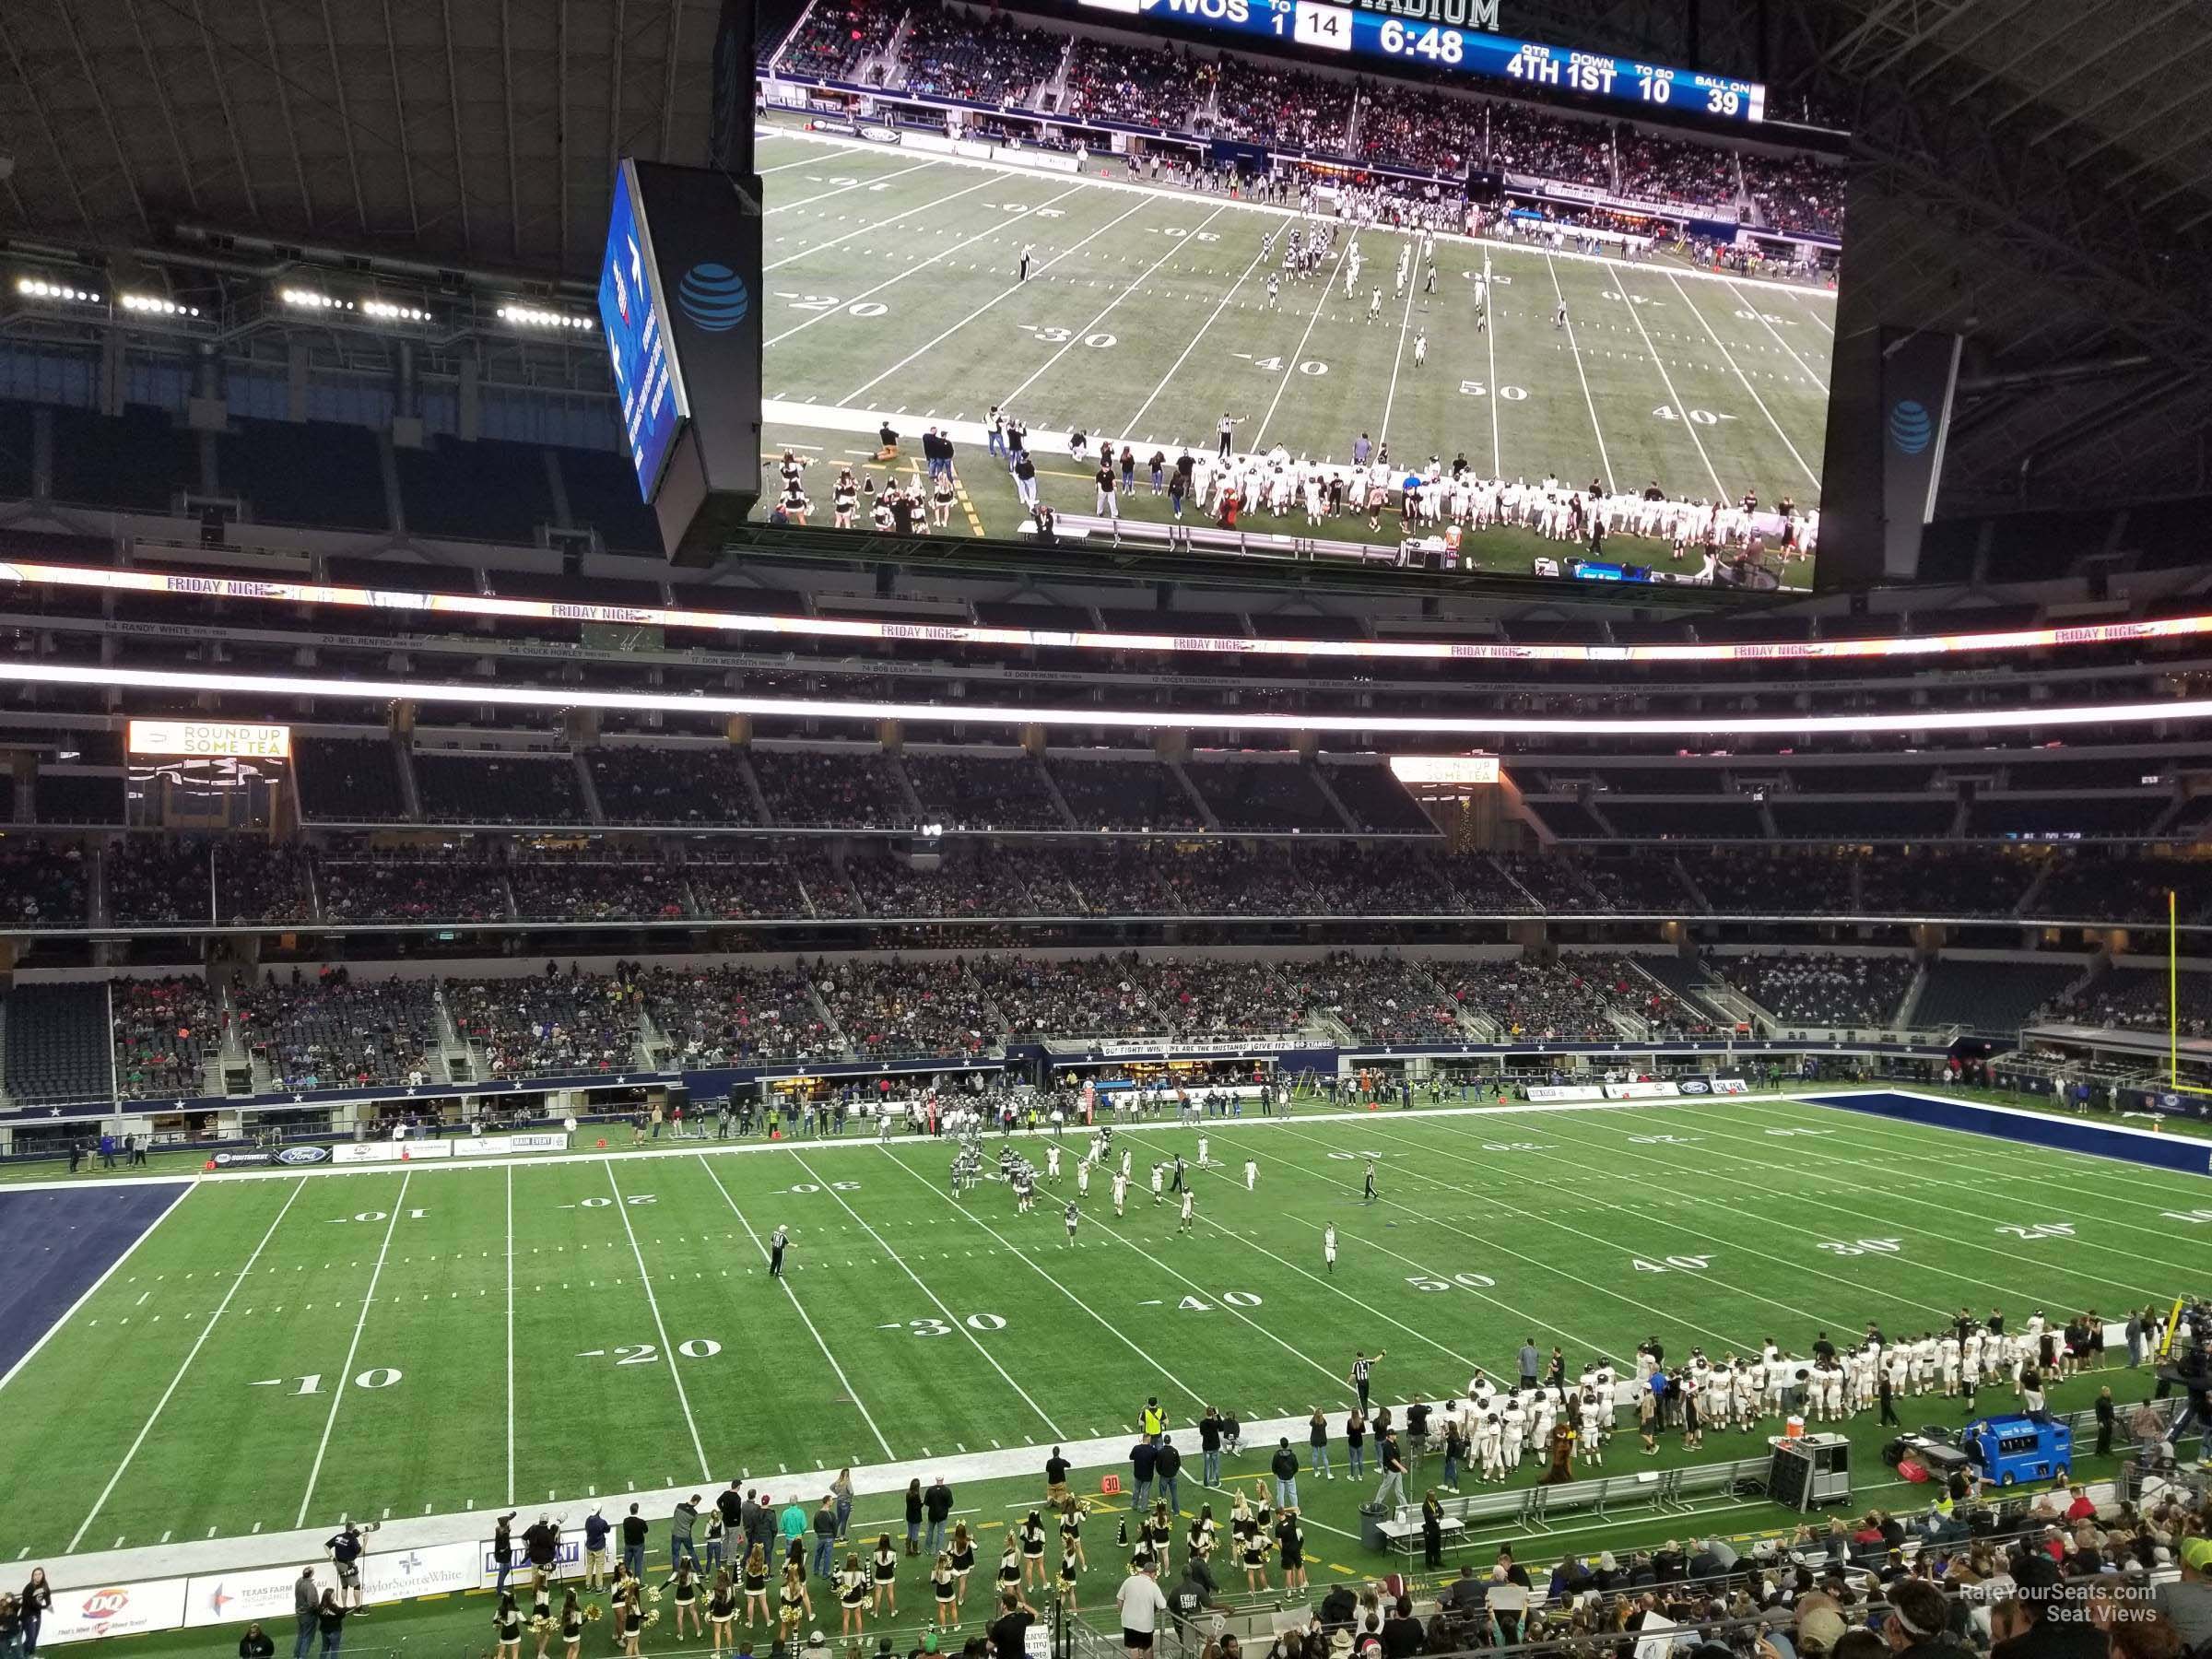 section c238, row 10 seat view  for football - at&t stadium (cowboys stadium)